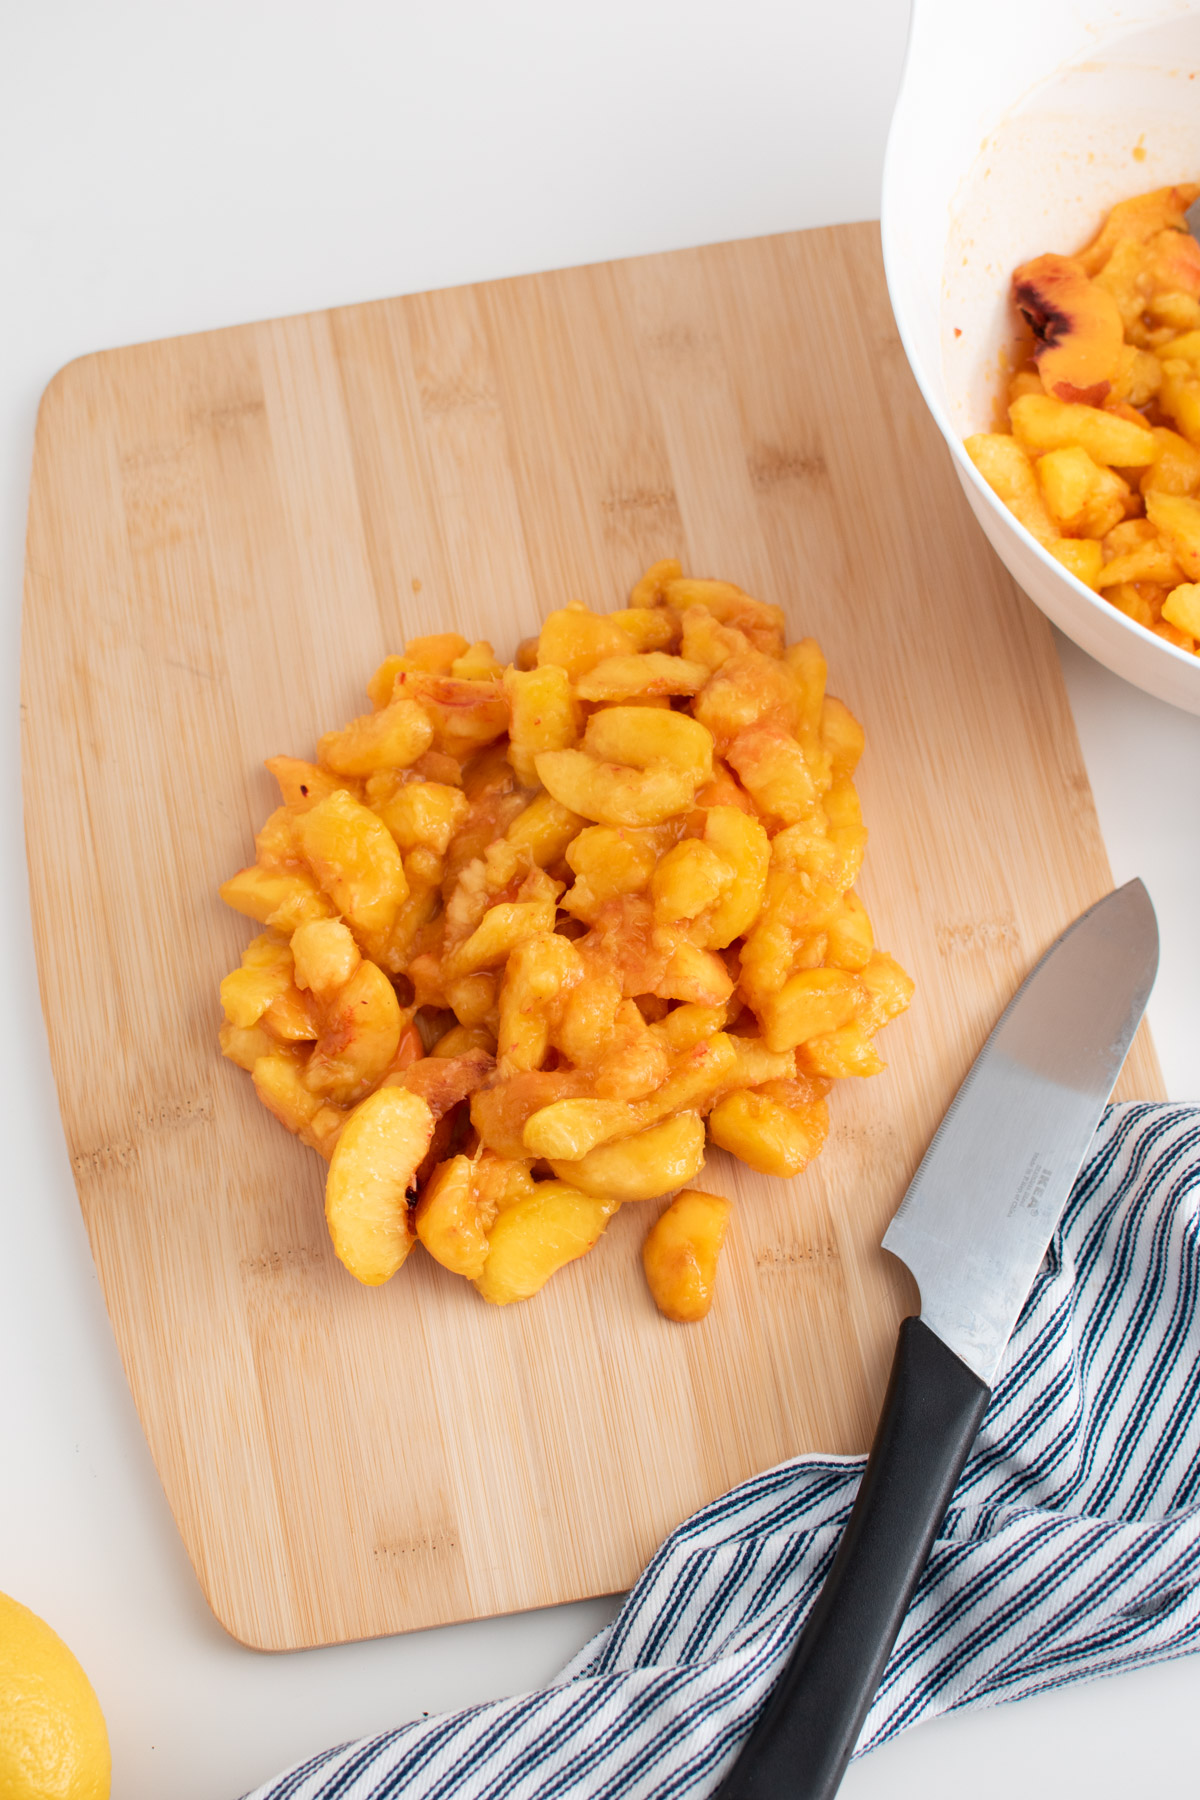 Large pile of sliced peaches on cutting board surrounded by knife, striped towel, and bowl of peaches.